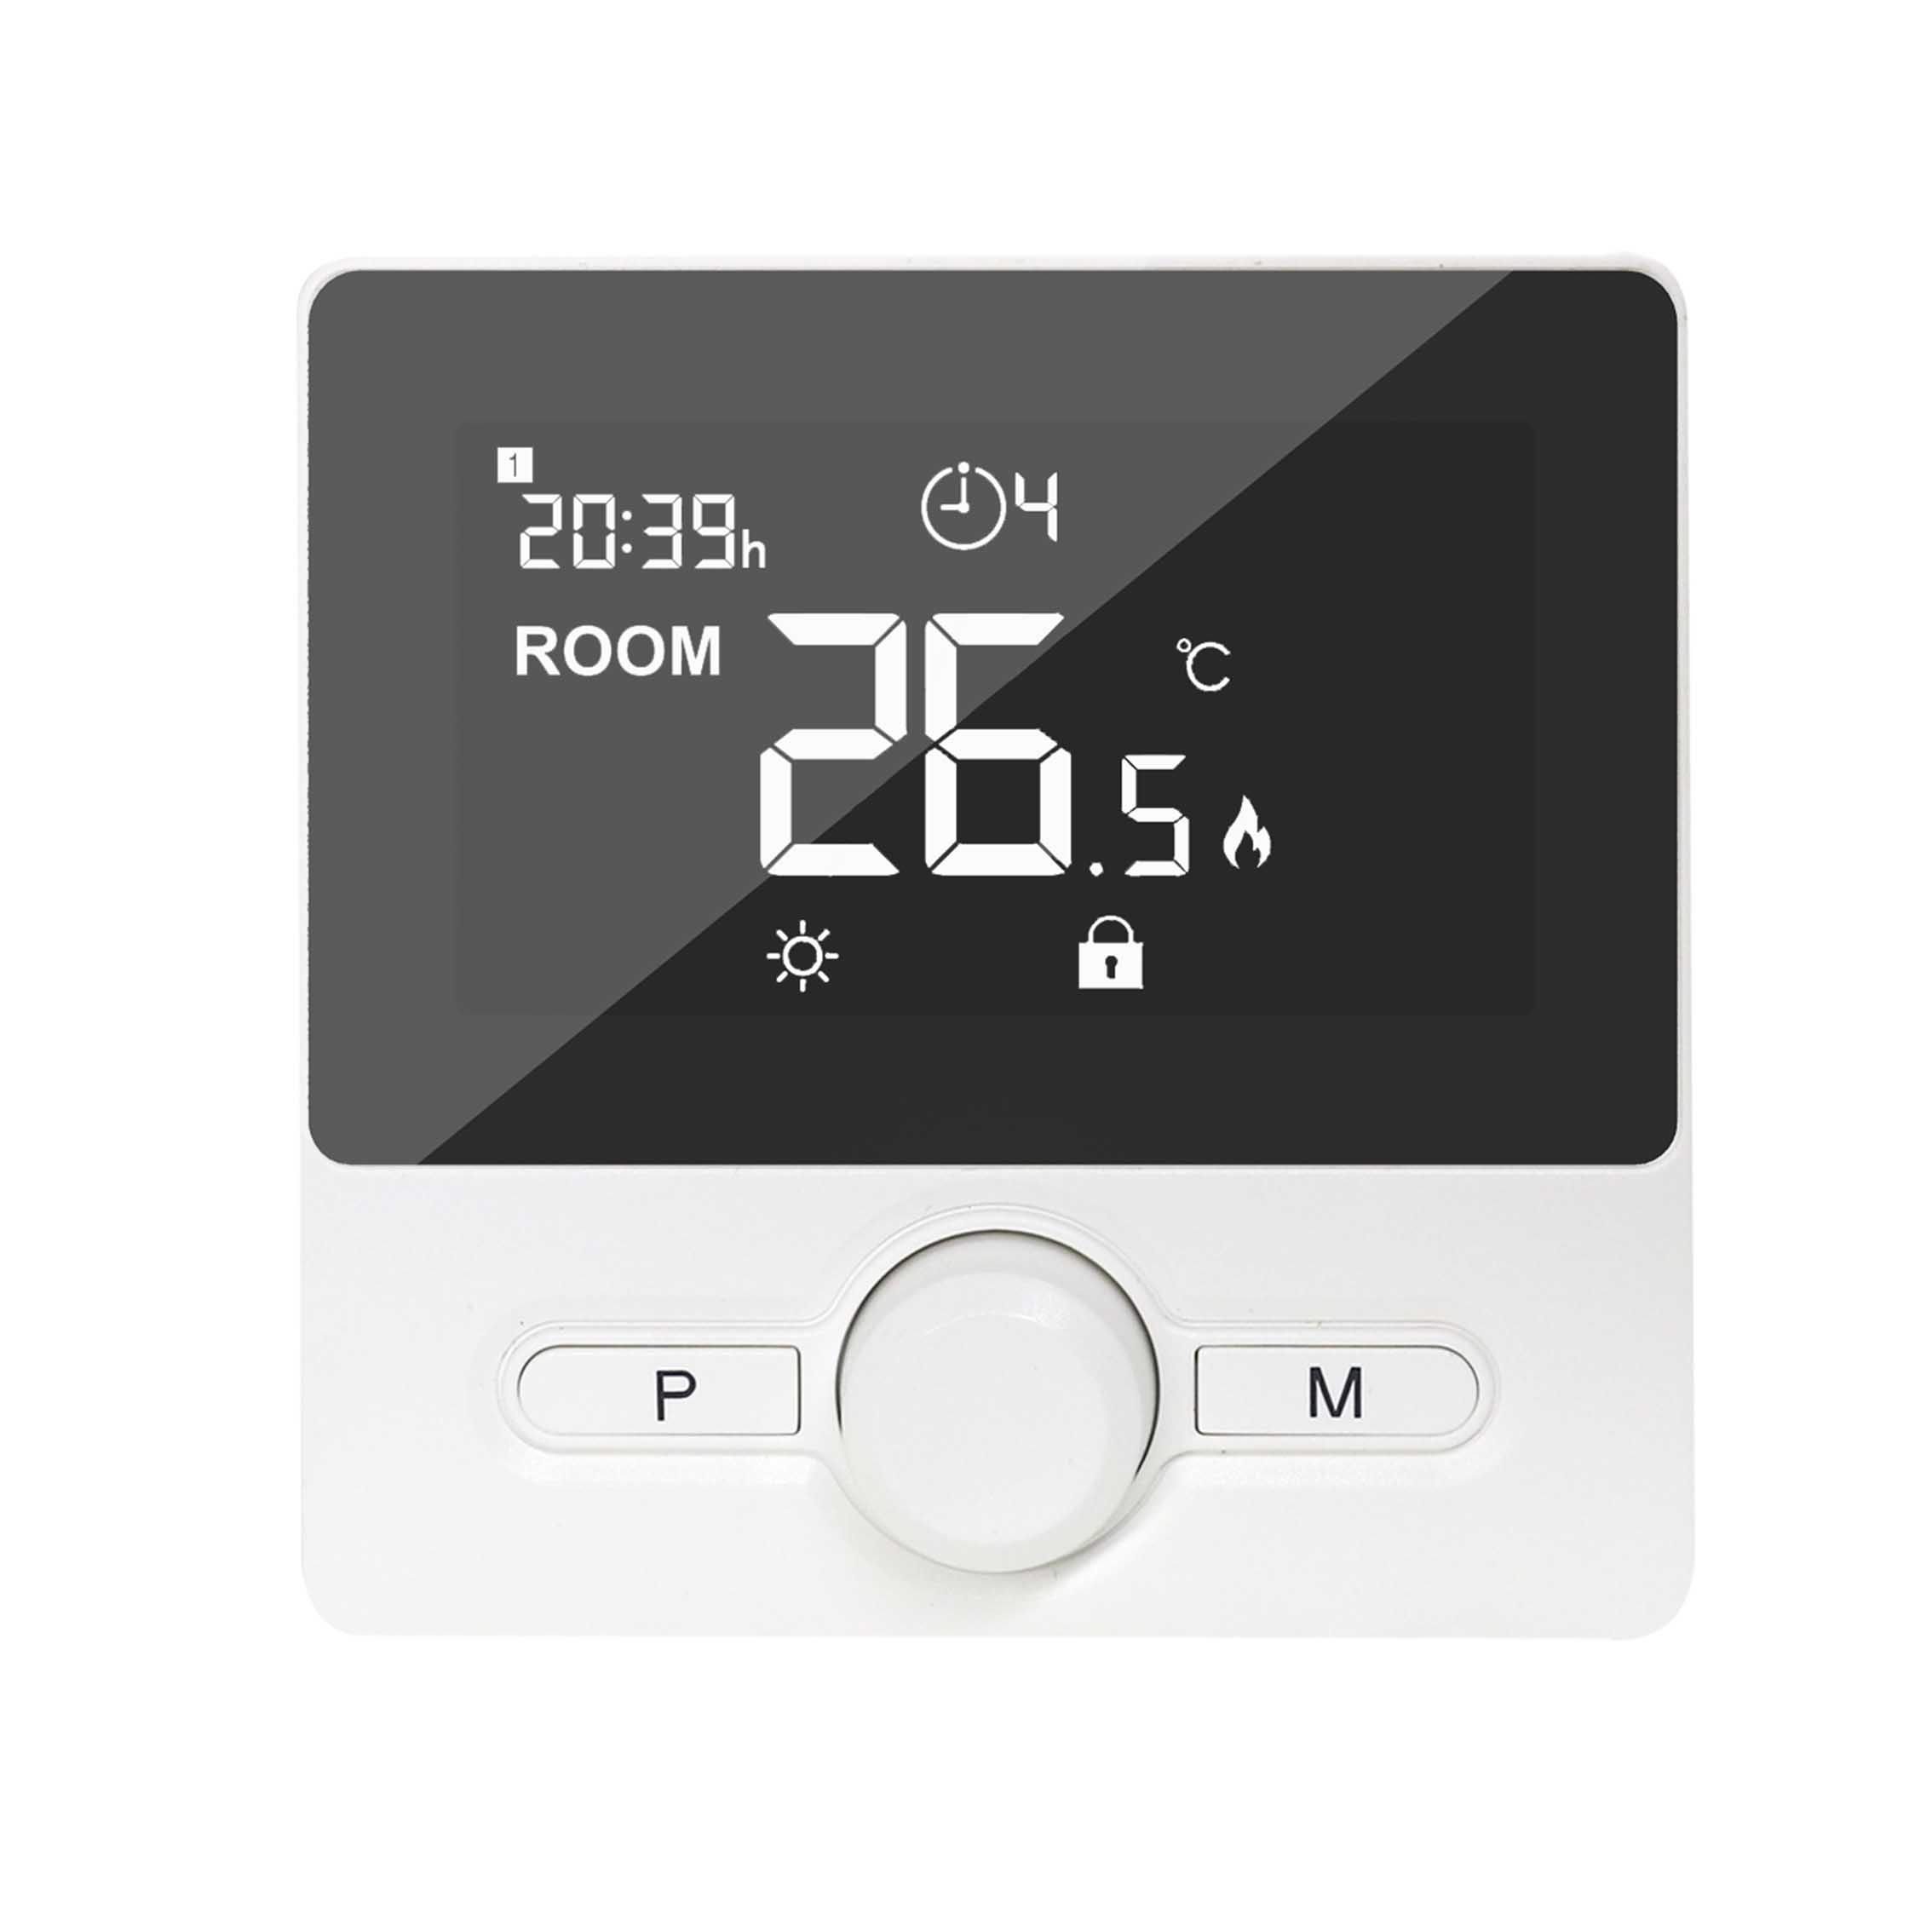 Wired Boiler Thermostat